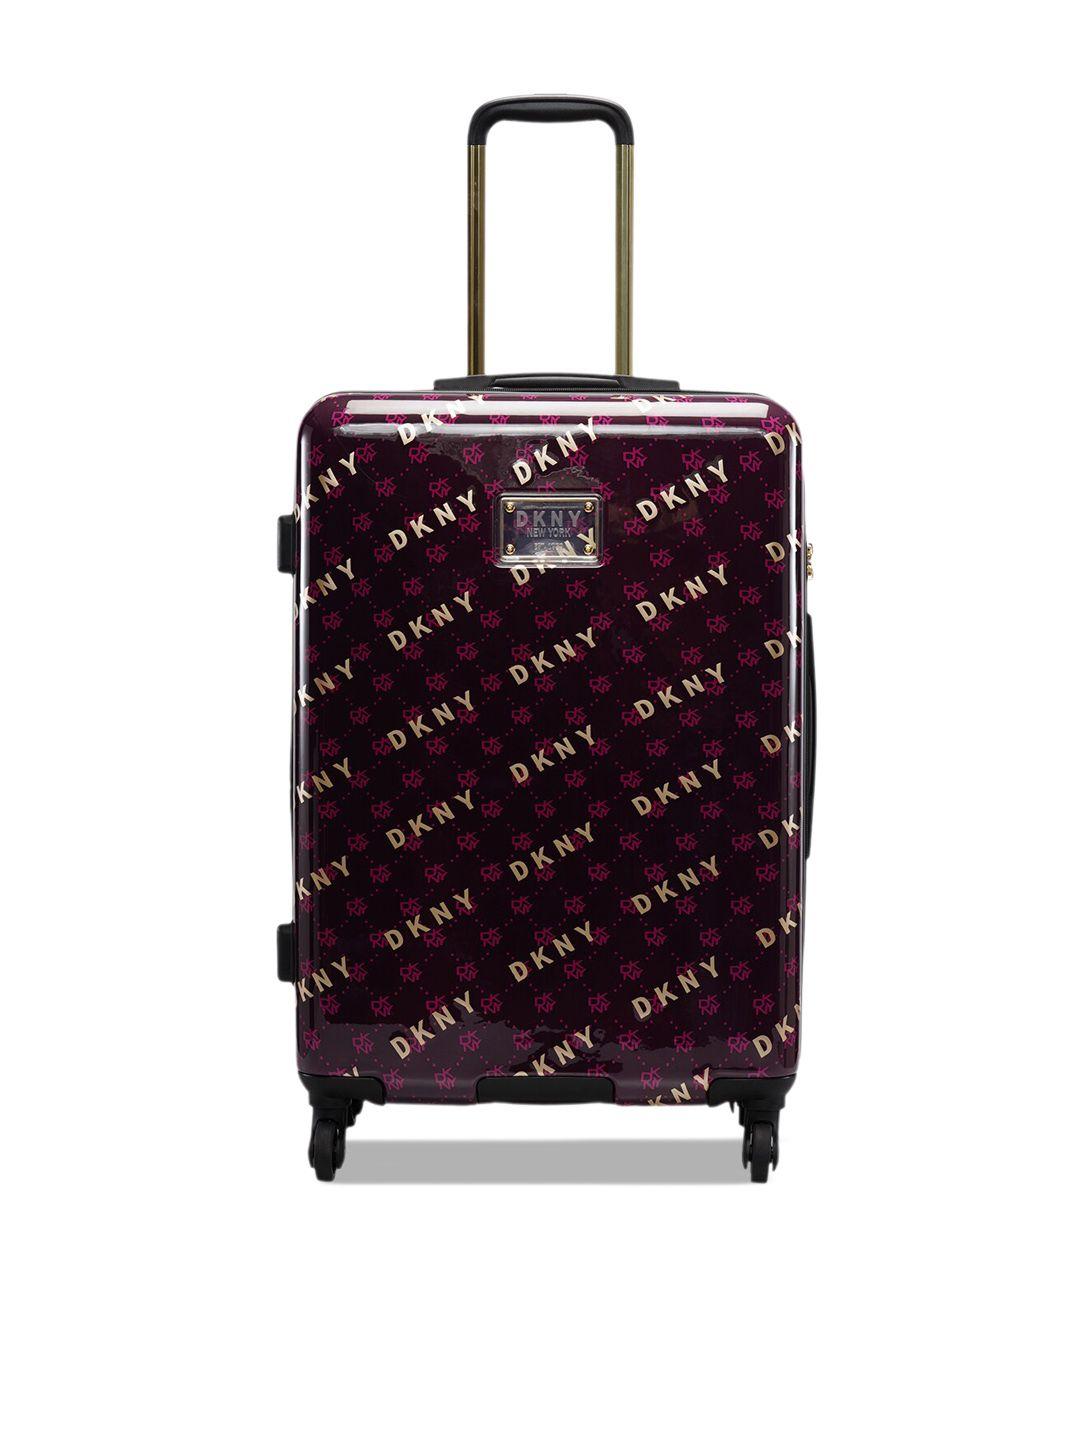 dkny on repeat printed hard-sided medium abs trolley suitcase